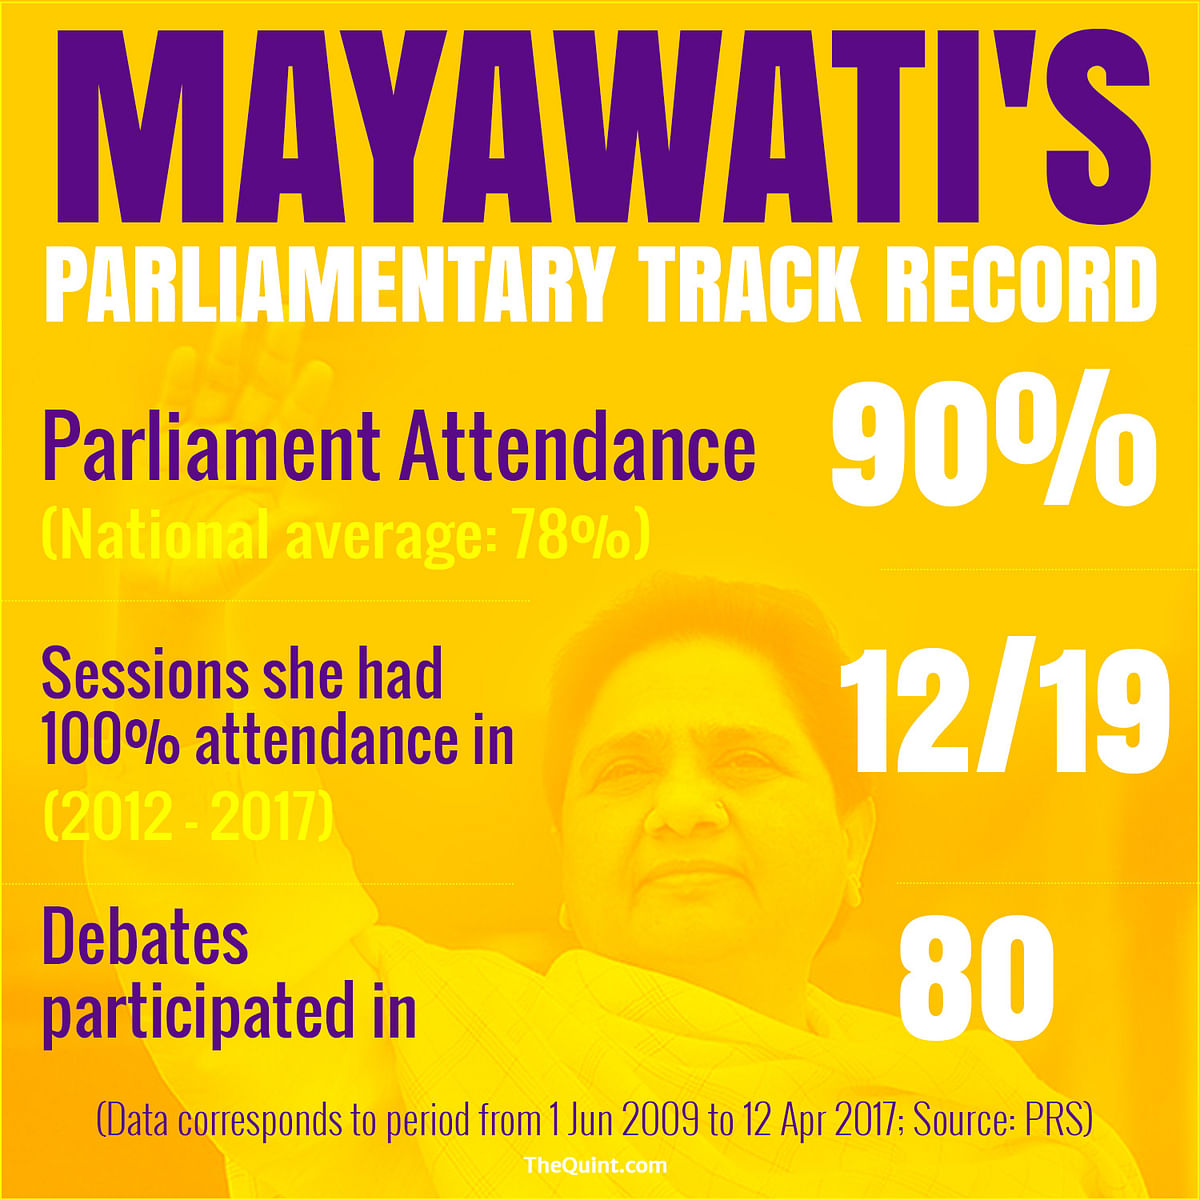 BJP leaders have dismissed Mayawati’s resignation as a “political stunt” while Lalu has hailed it as a “bold move”.